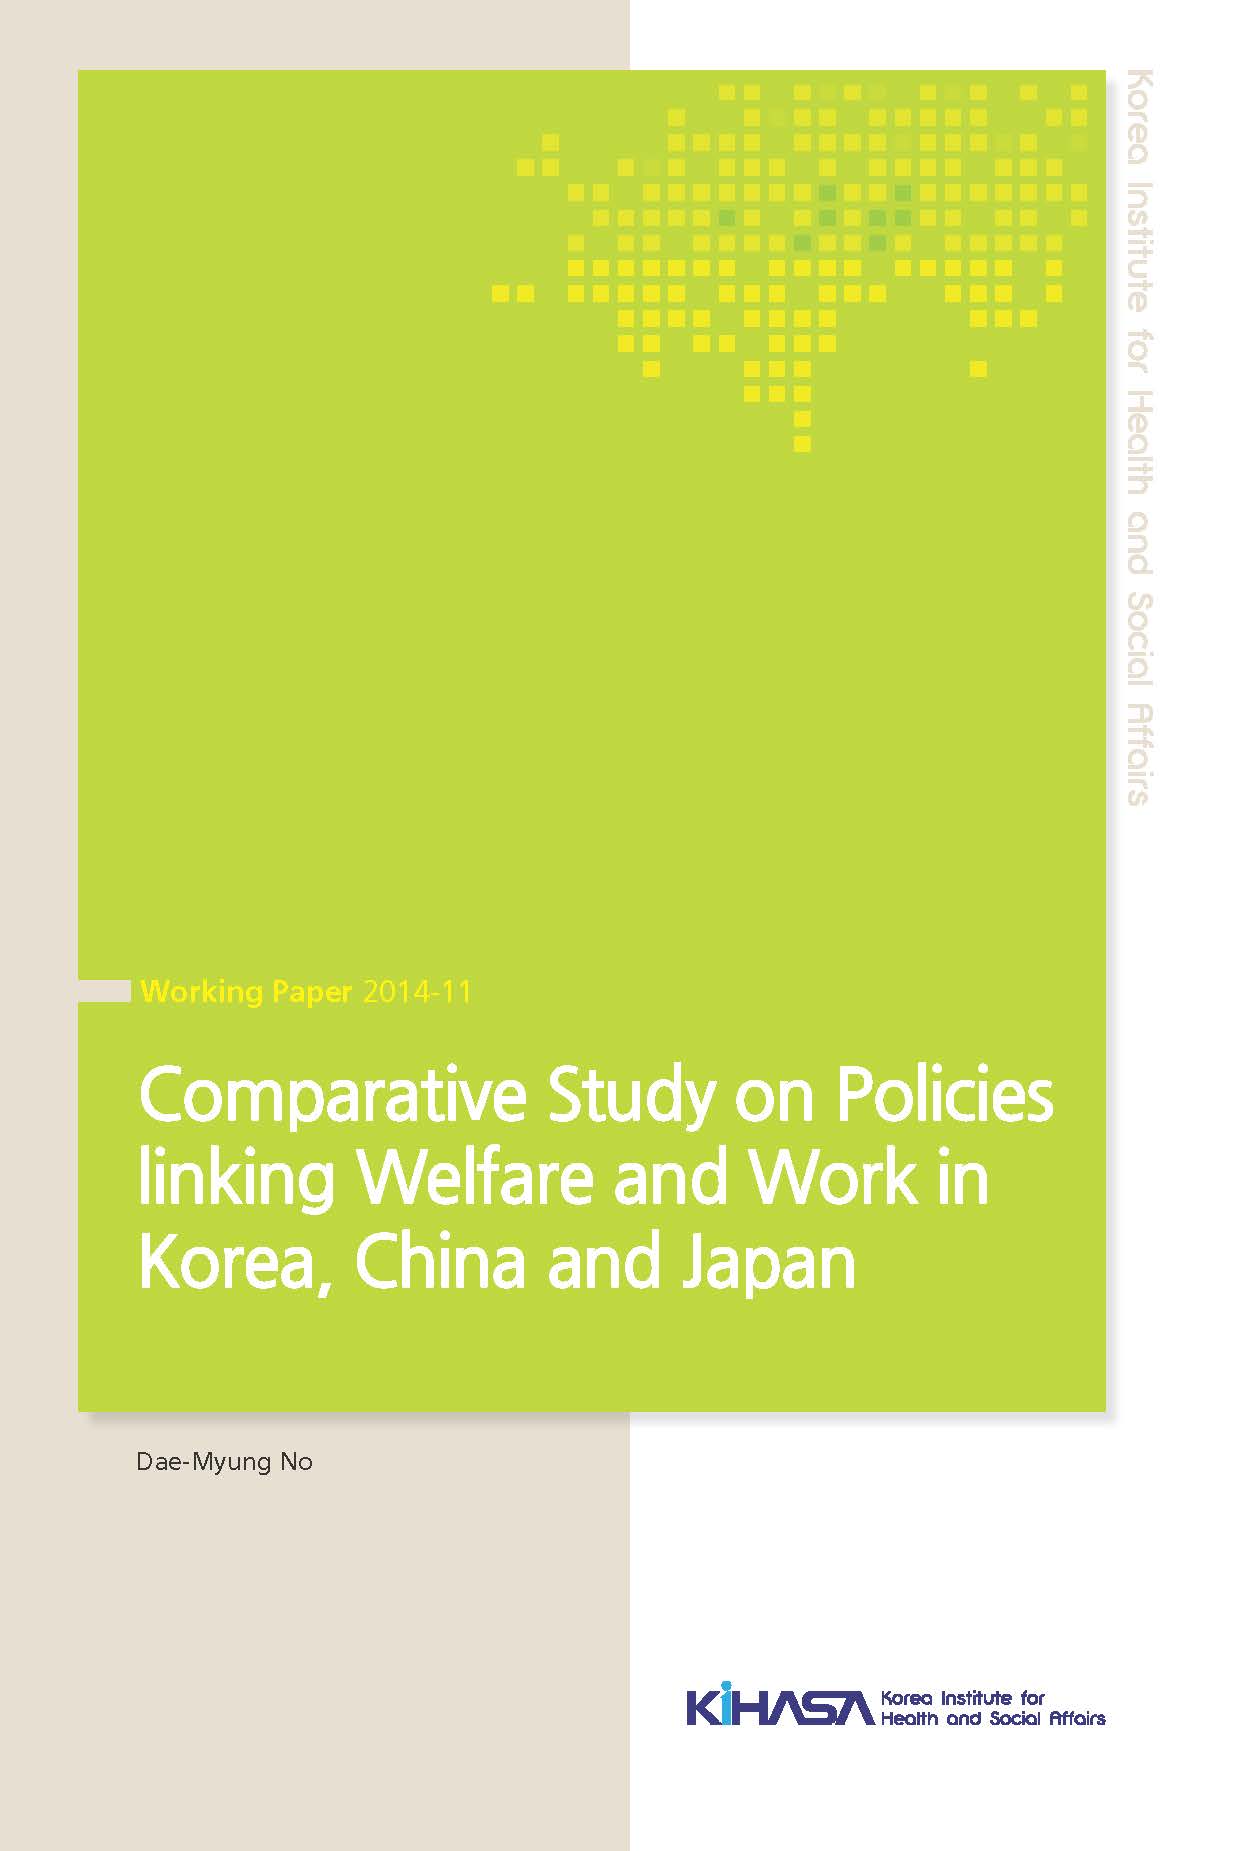 Comparative Study on Policies linking Welfare and Work in Korea, China and Japan